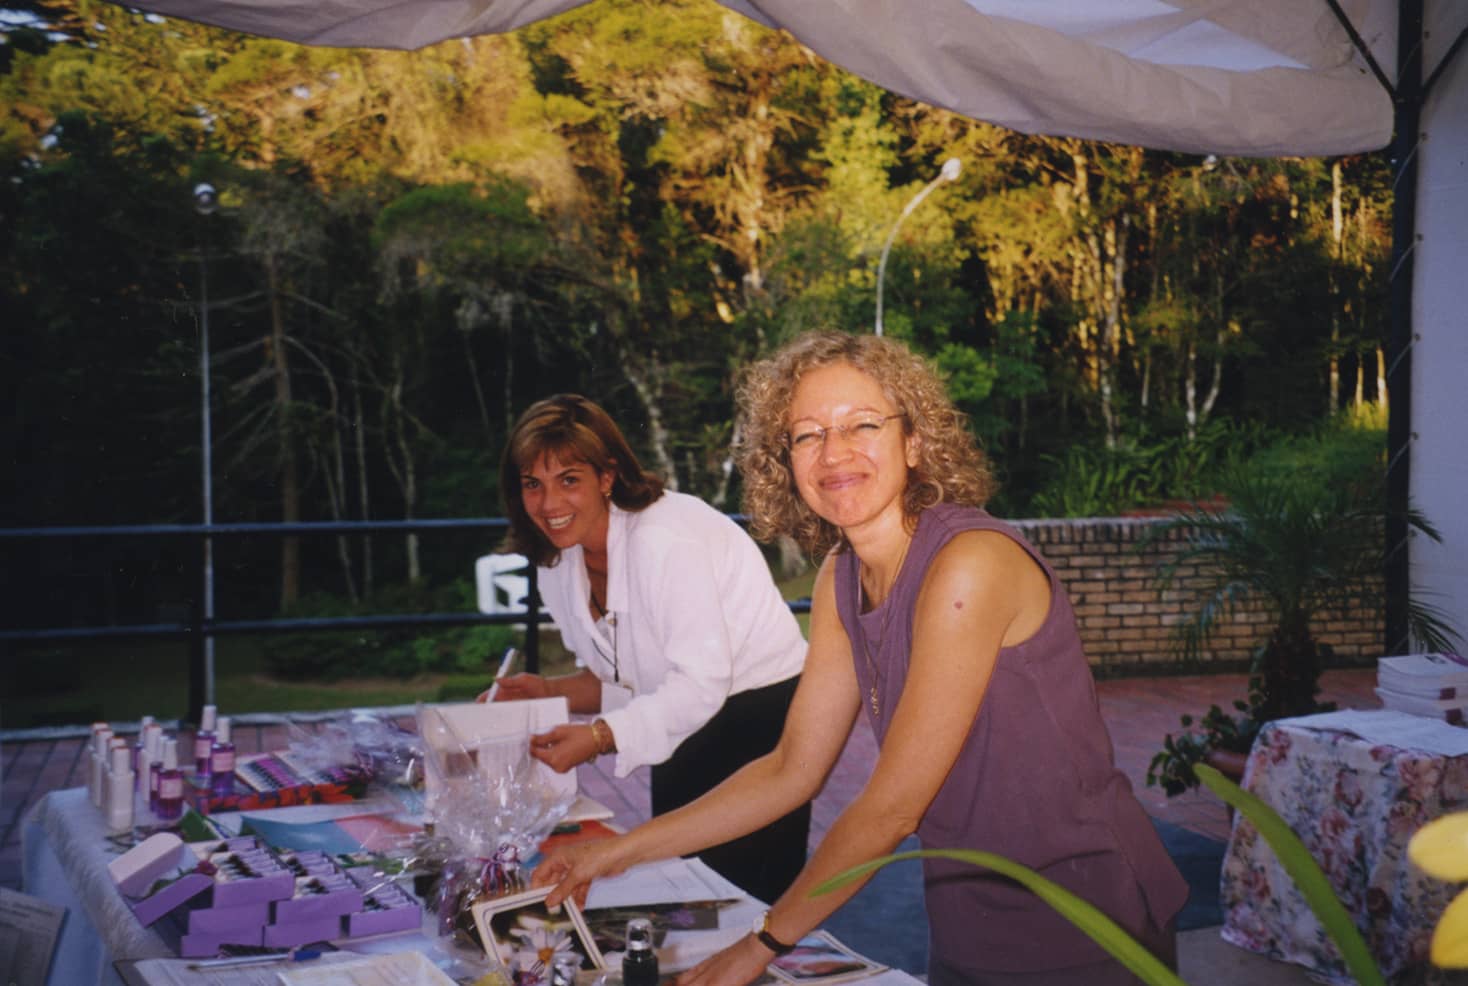 Mentoring for Flower Essence Practitioners - For 22 years, in Brazil, I have co-owned a business that offered Education and Distribution of flower essences, organizing seminars gather individuals throughout the country.